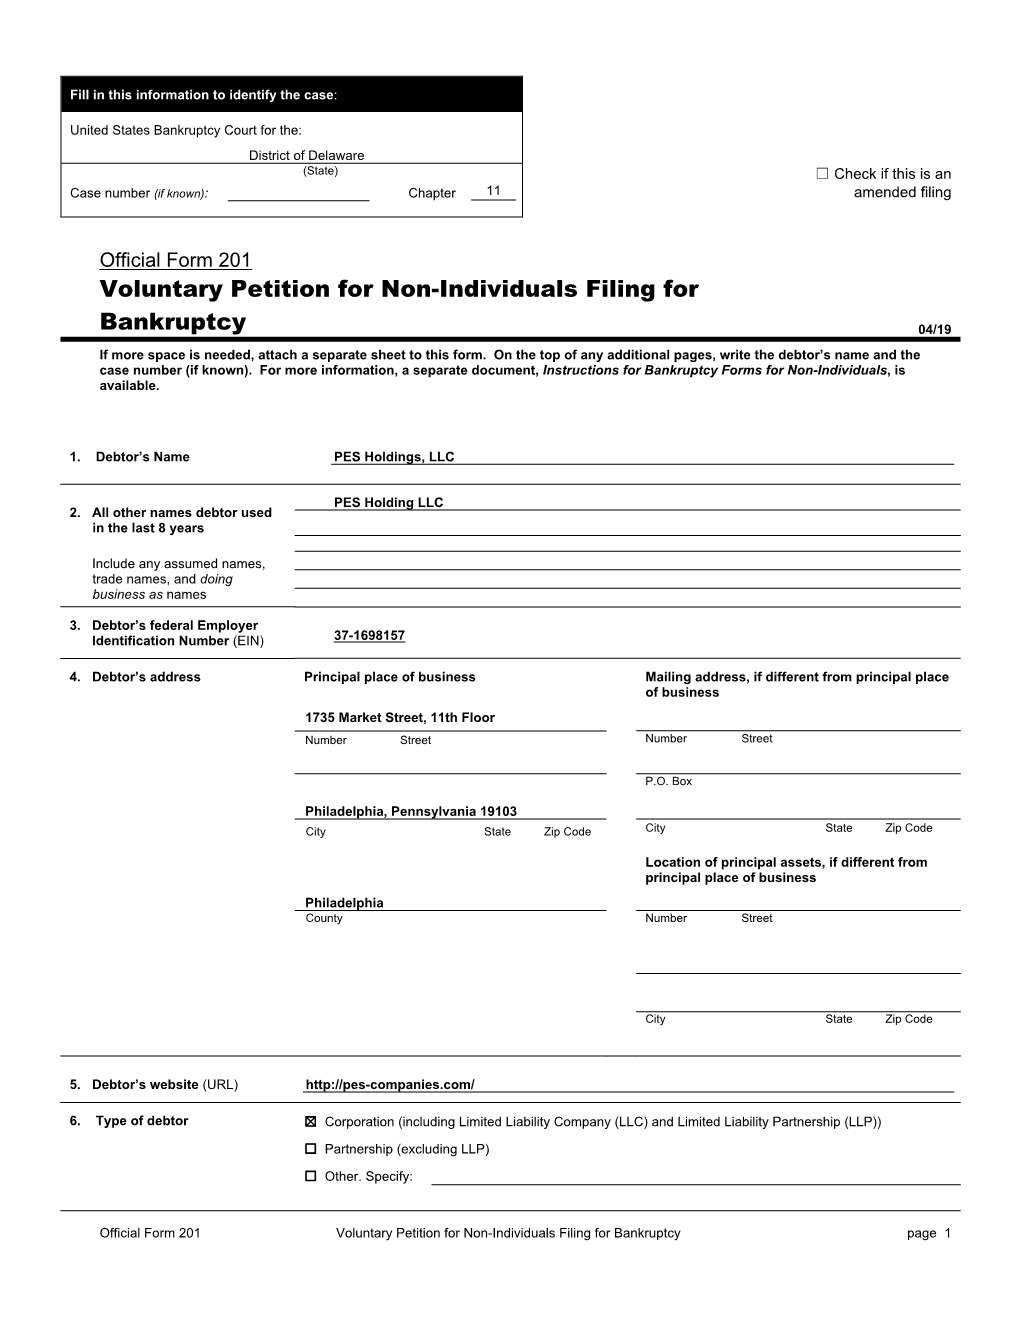 Voluntary Petition for Non-Individuals Filing for Bankruptcy Page 1 Debtor PES Holdings, LLC Case Number (If Known) Name